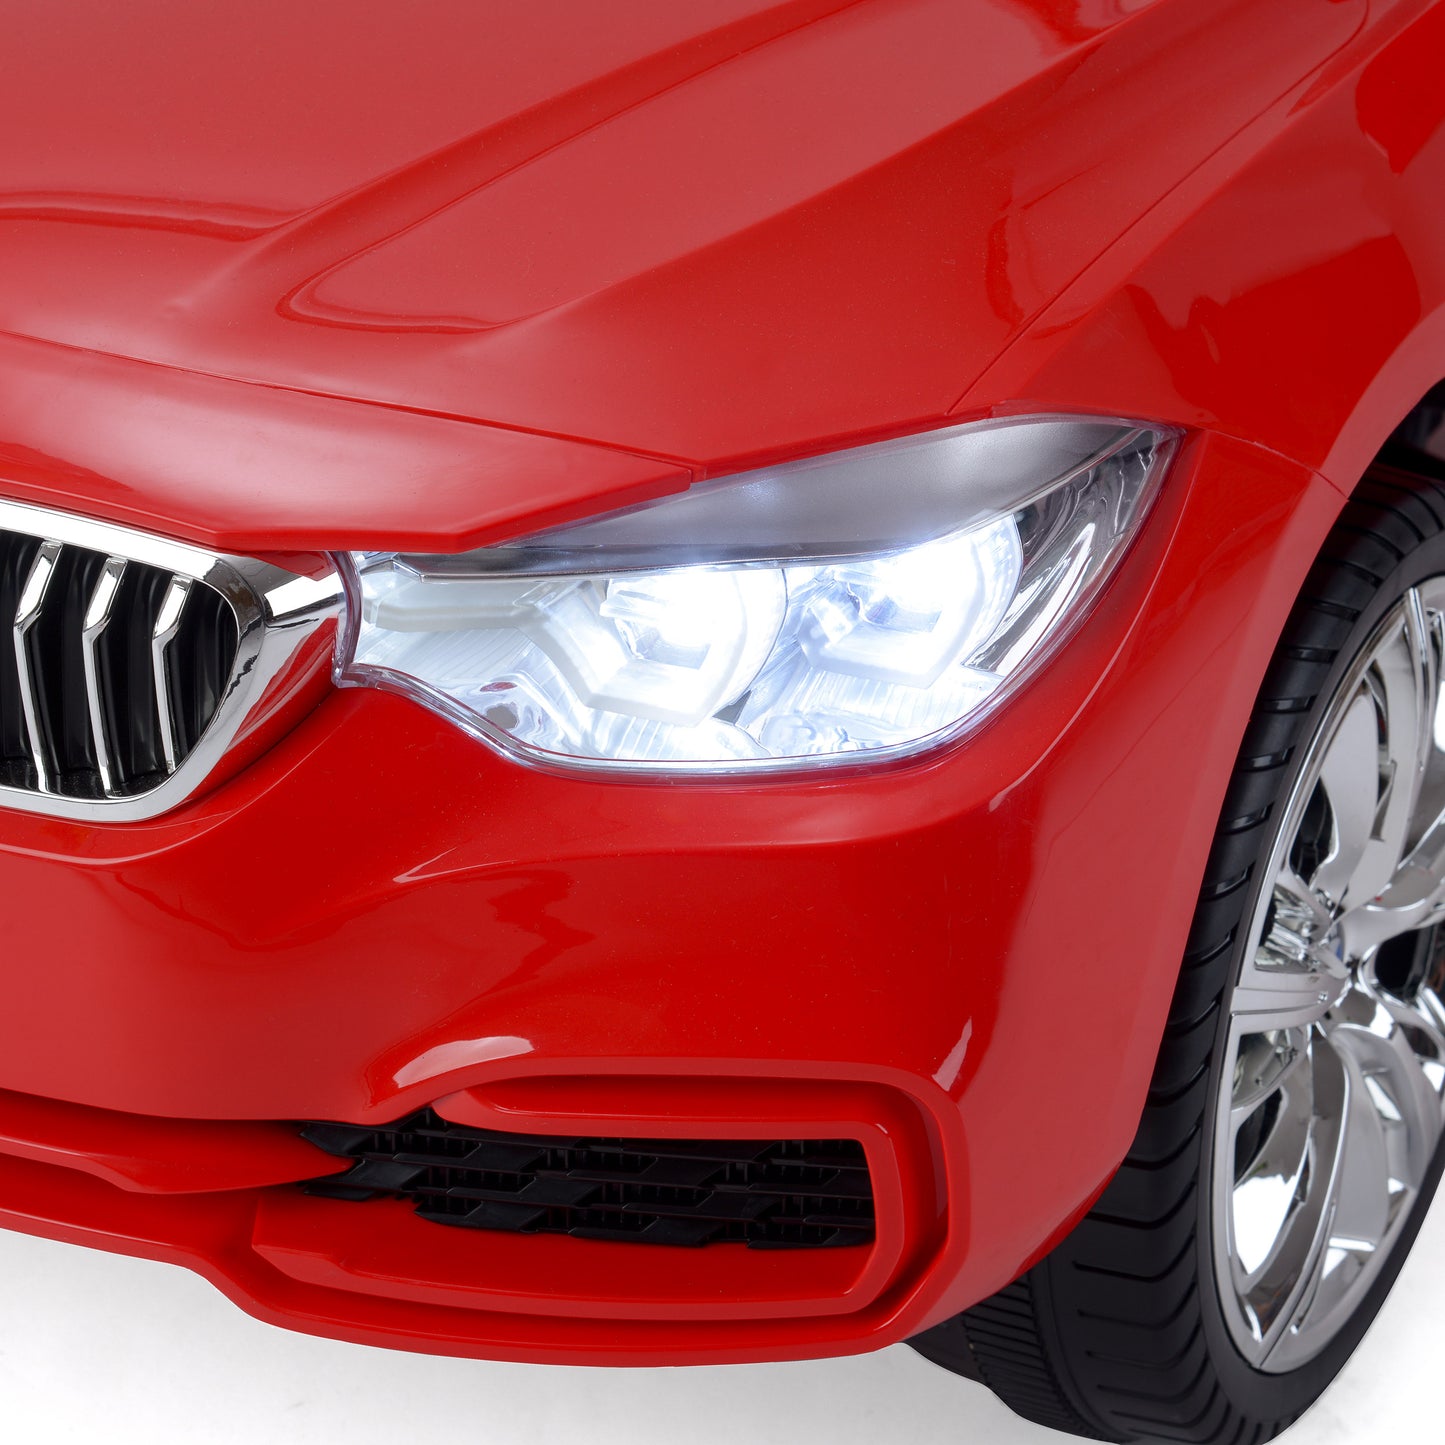 XOOTZ® - TY6014RD - BMW 4 SERIES ELECTRIC RIDE ON RED - Rich Kids Playground